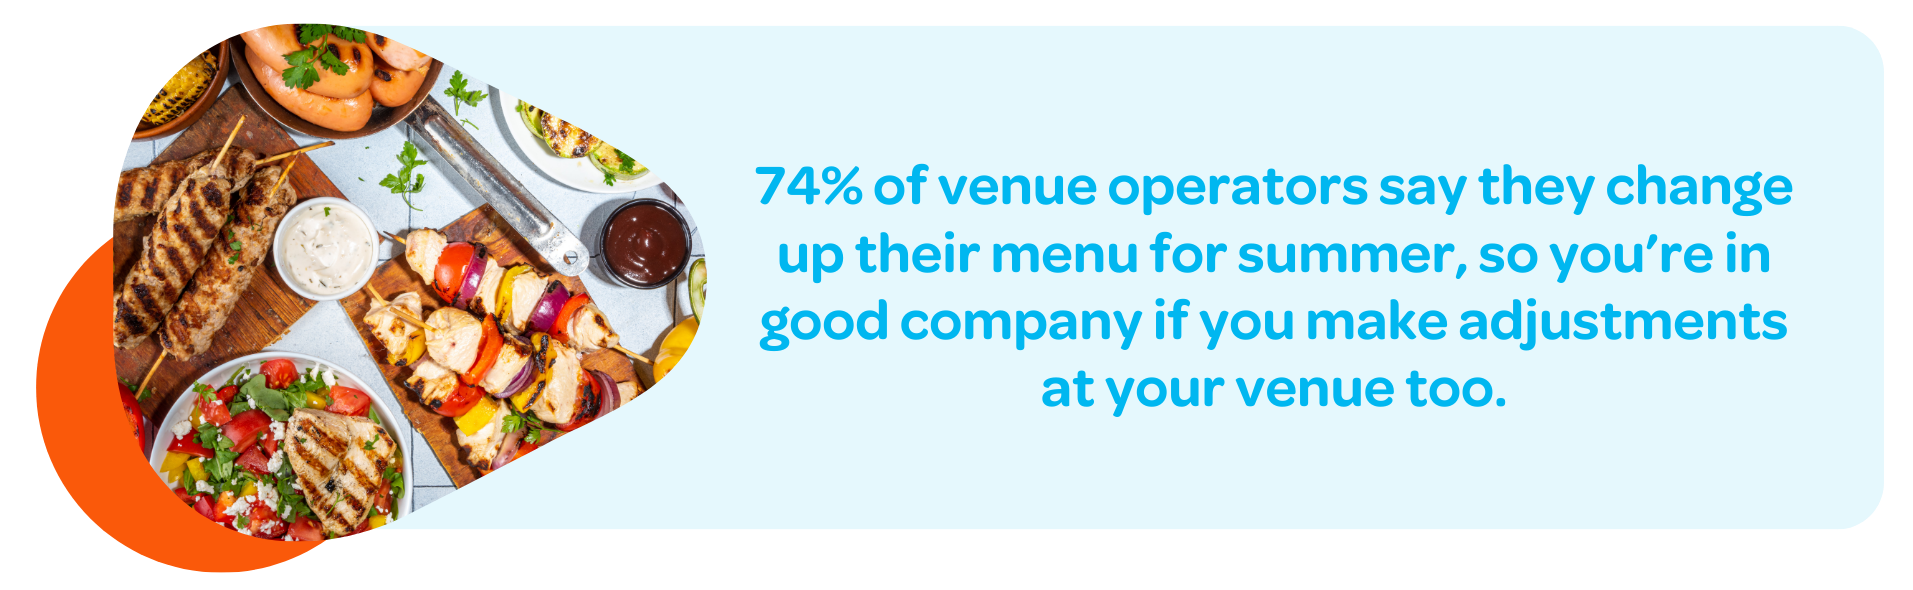 74% of venue operators say they change up their menu for summer, so you’re in good company if you make adjustments at your venue too